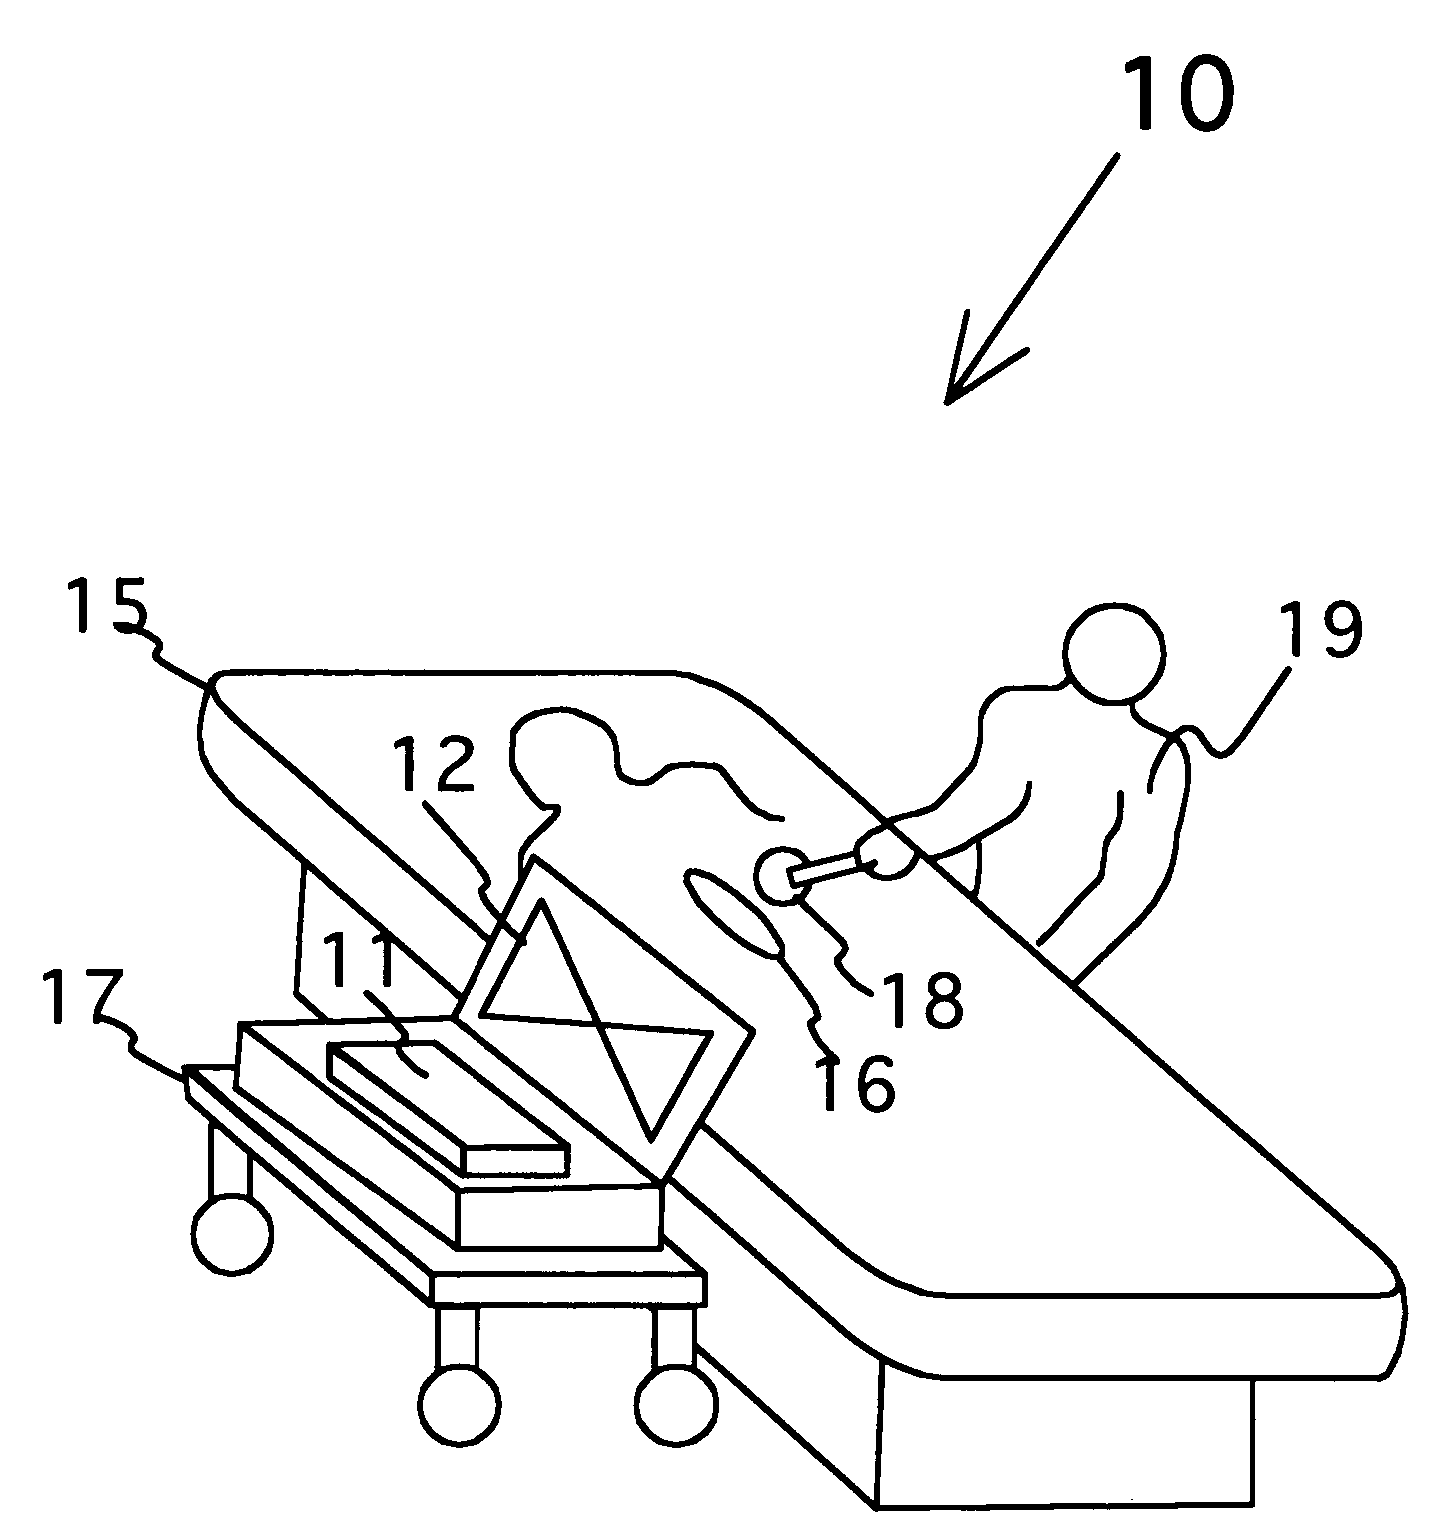 Surgical implement detector utilizing a radio-frequency identification marker